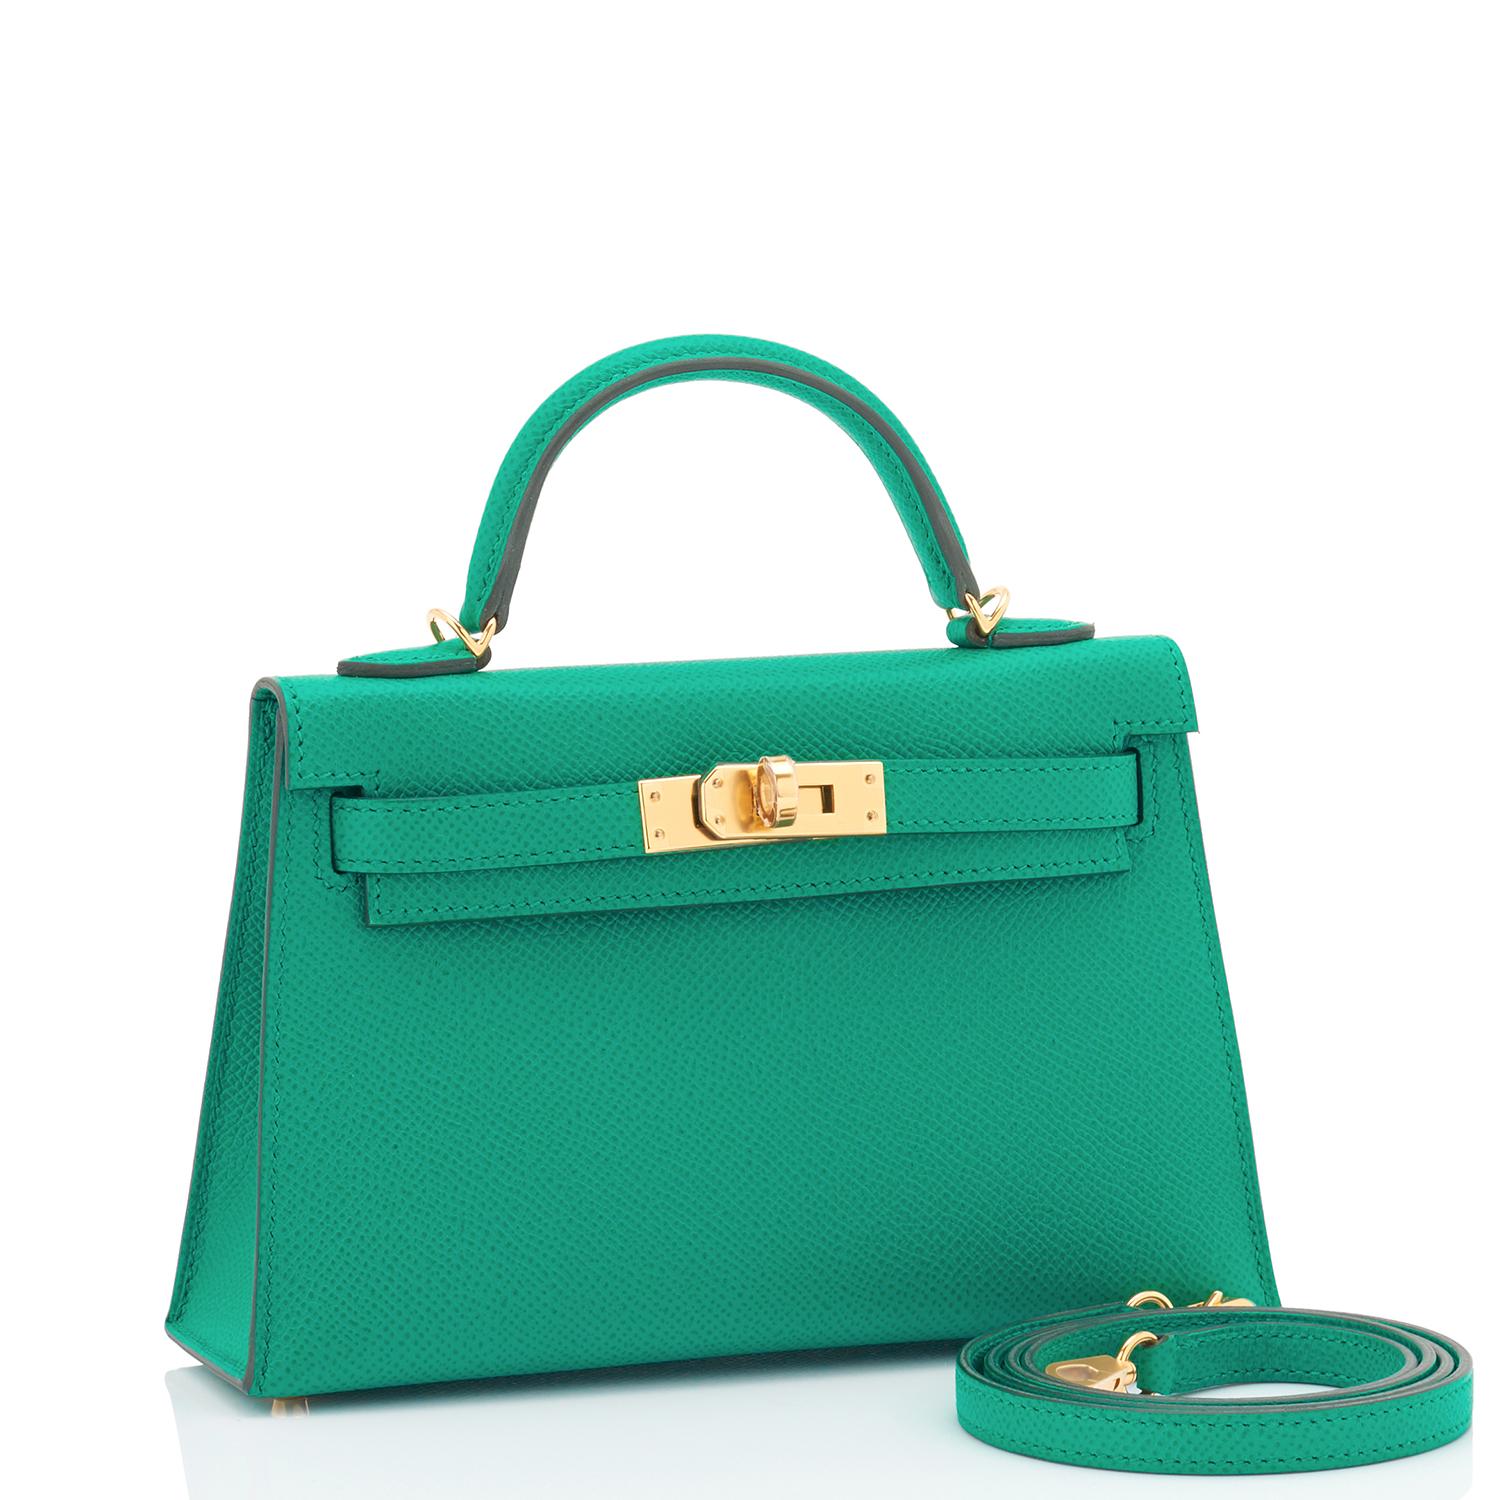 Chicjoy is pleased to present this Hermes Mini Kelly 20cm Vert Jade VIP Epsom Gold Hardware
Brand New in Box.  Store Fresh. Pristine Condition (with plastic on hardware)
Perfect gift! Comes full set with shoulder strap, sleeper for the bag, Hermes